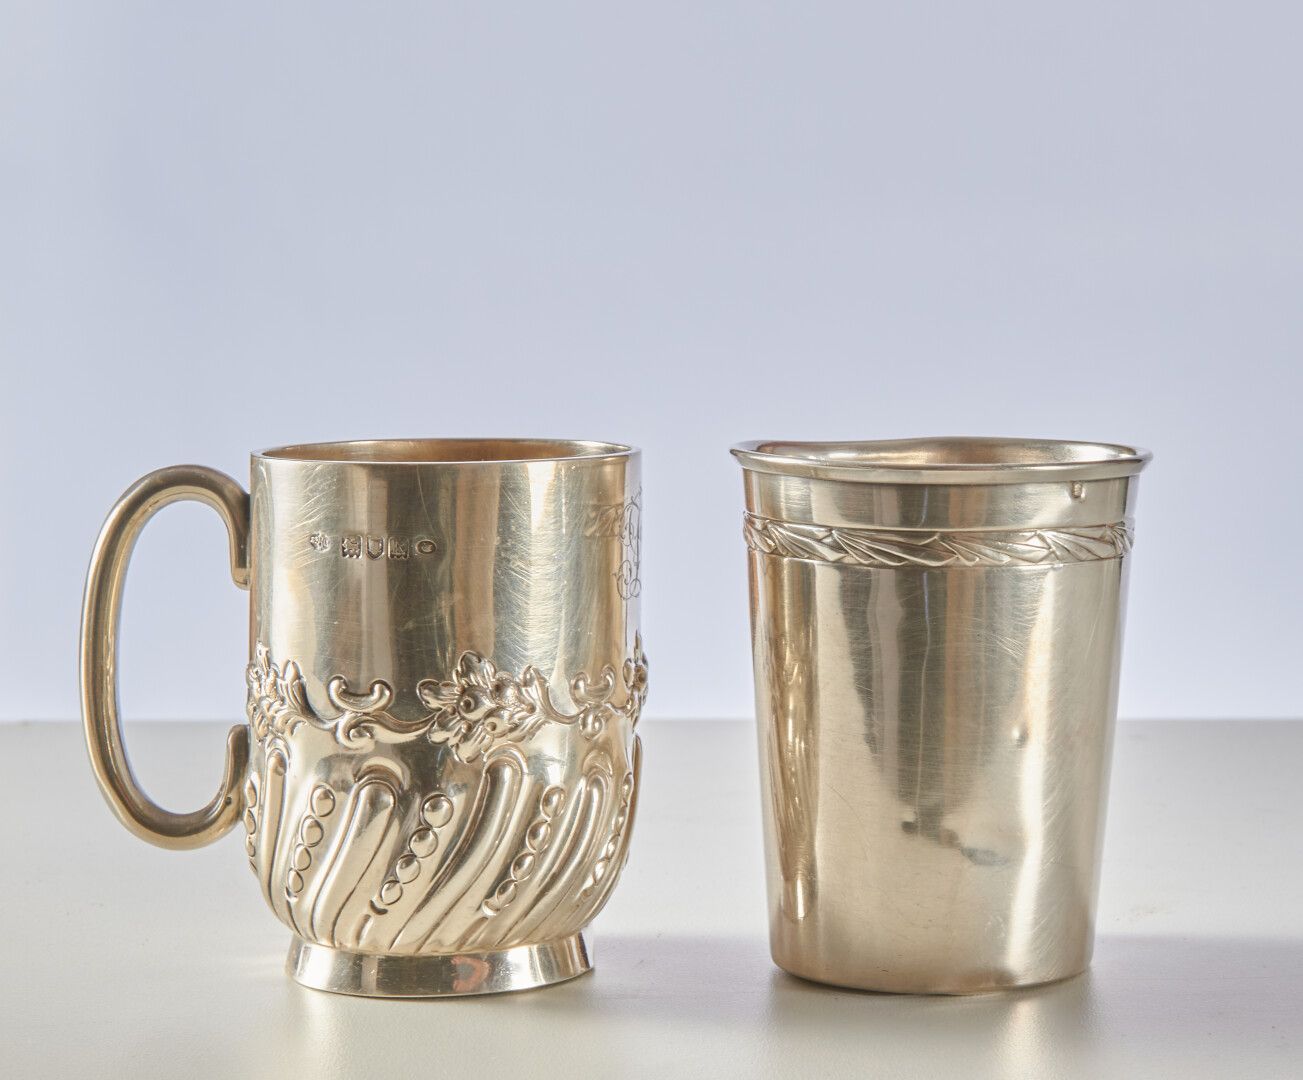 Null One English silver tumbler and one Minerva silver tumbler - weight : 186g